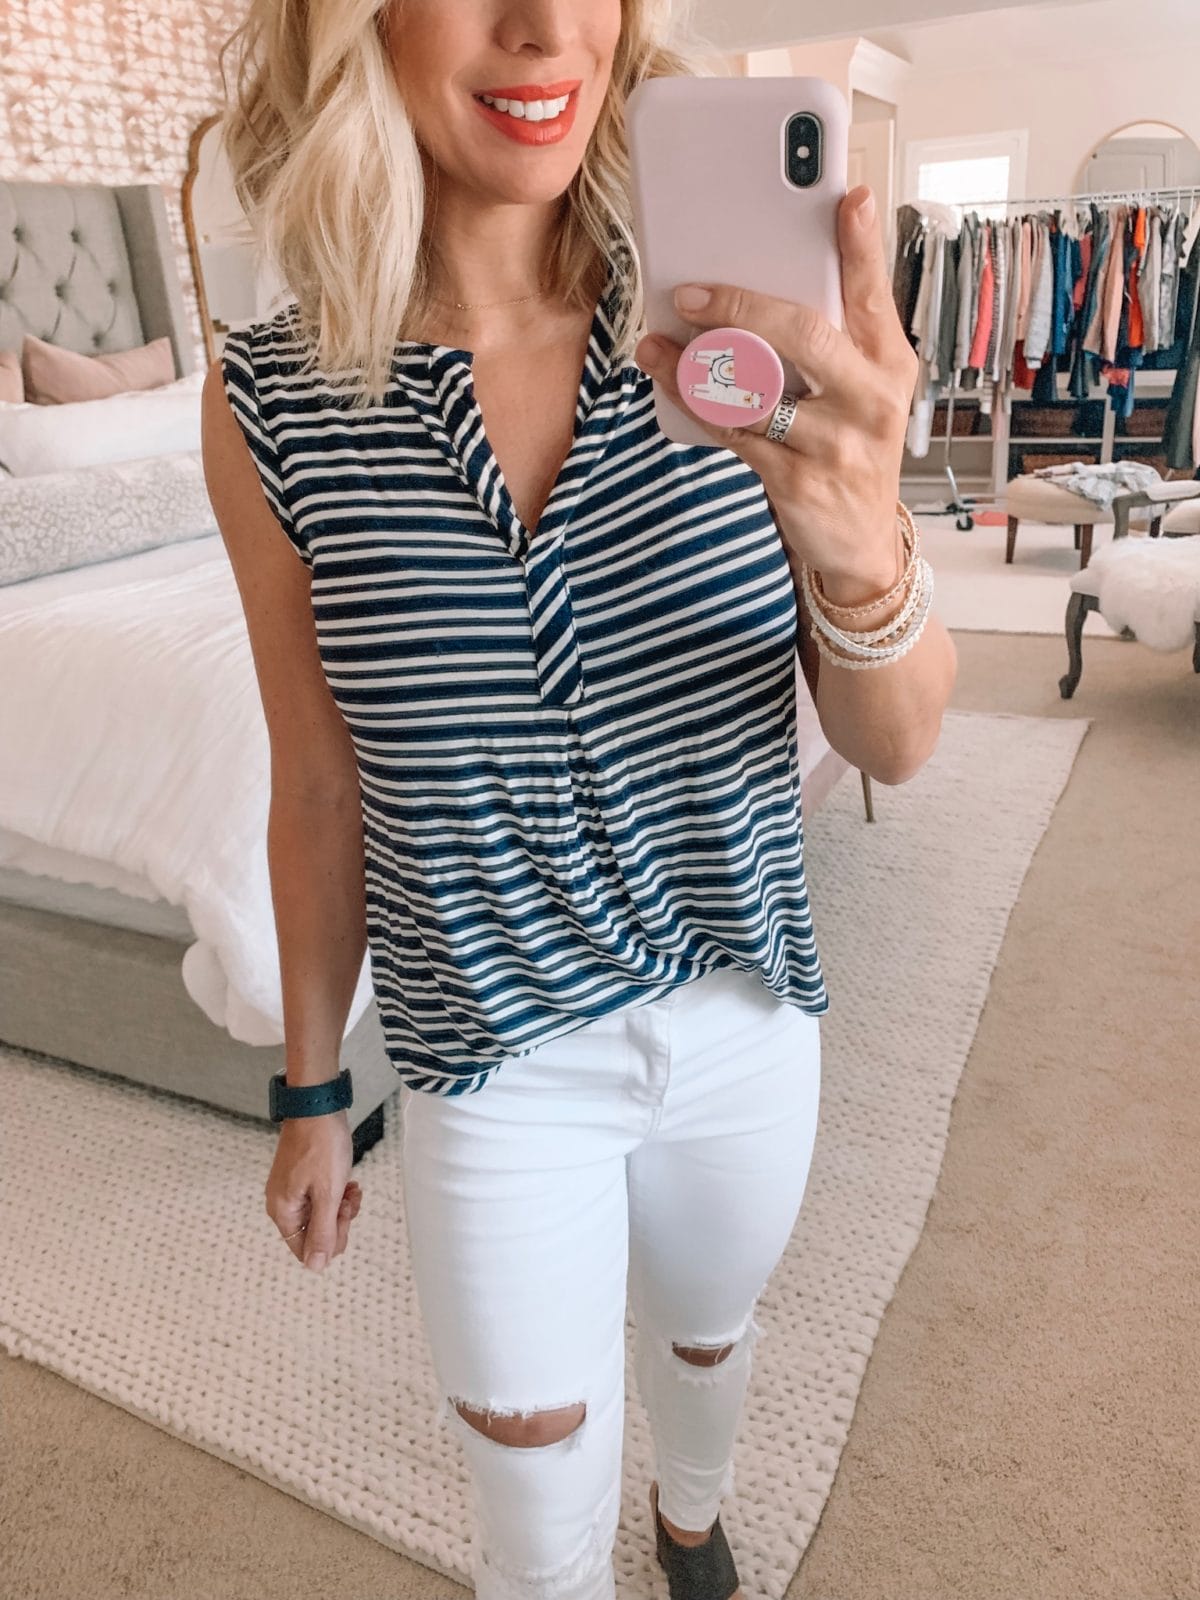 Dressing Room - Stripe tank with white jeans